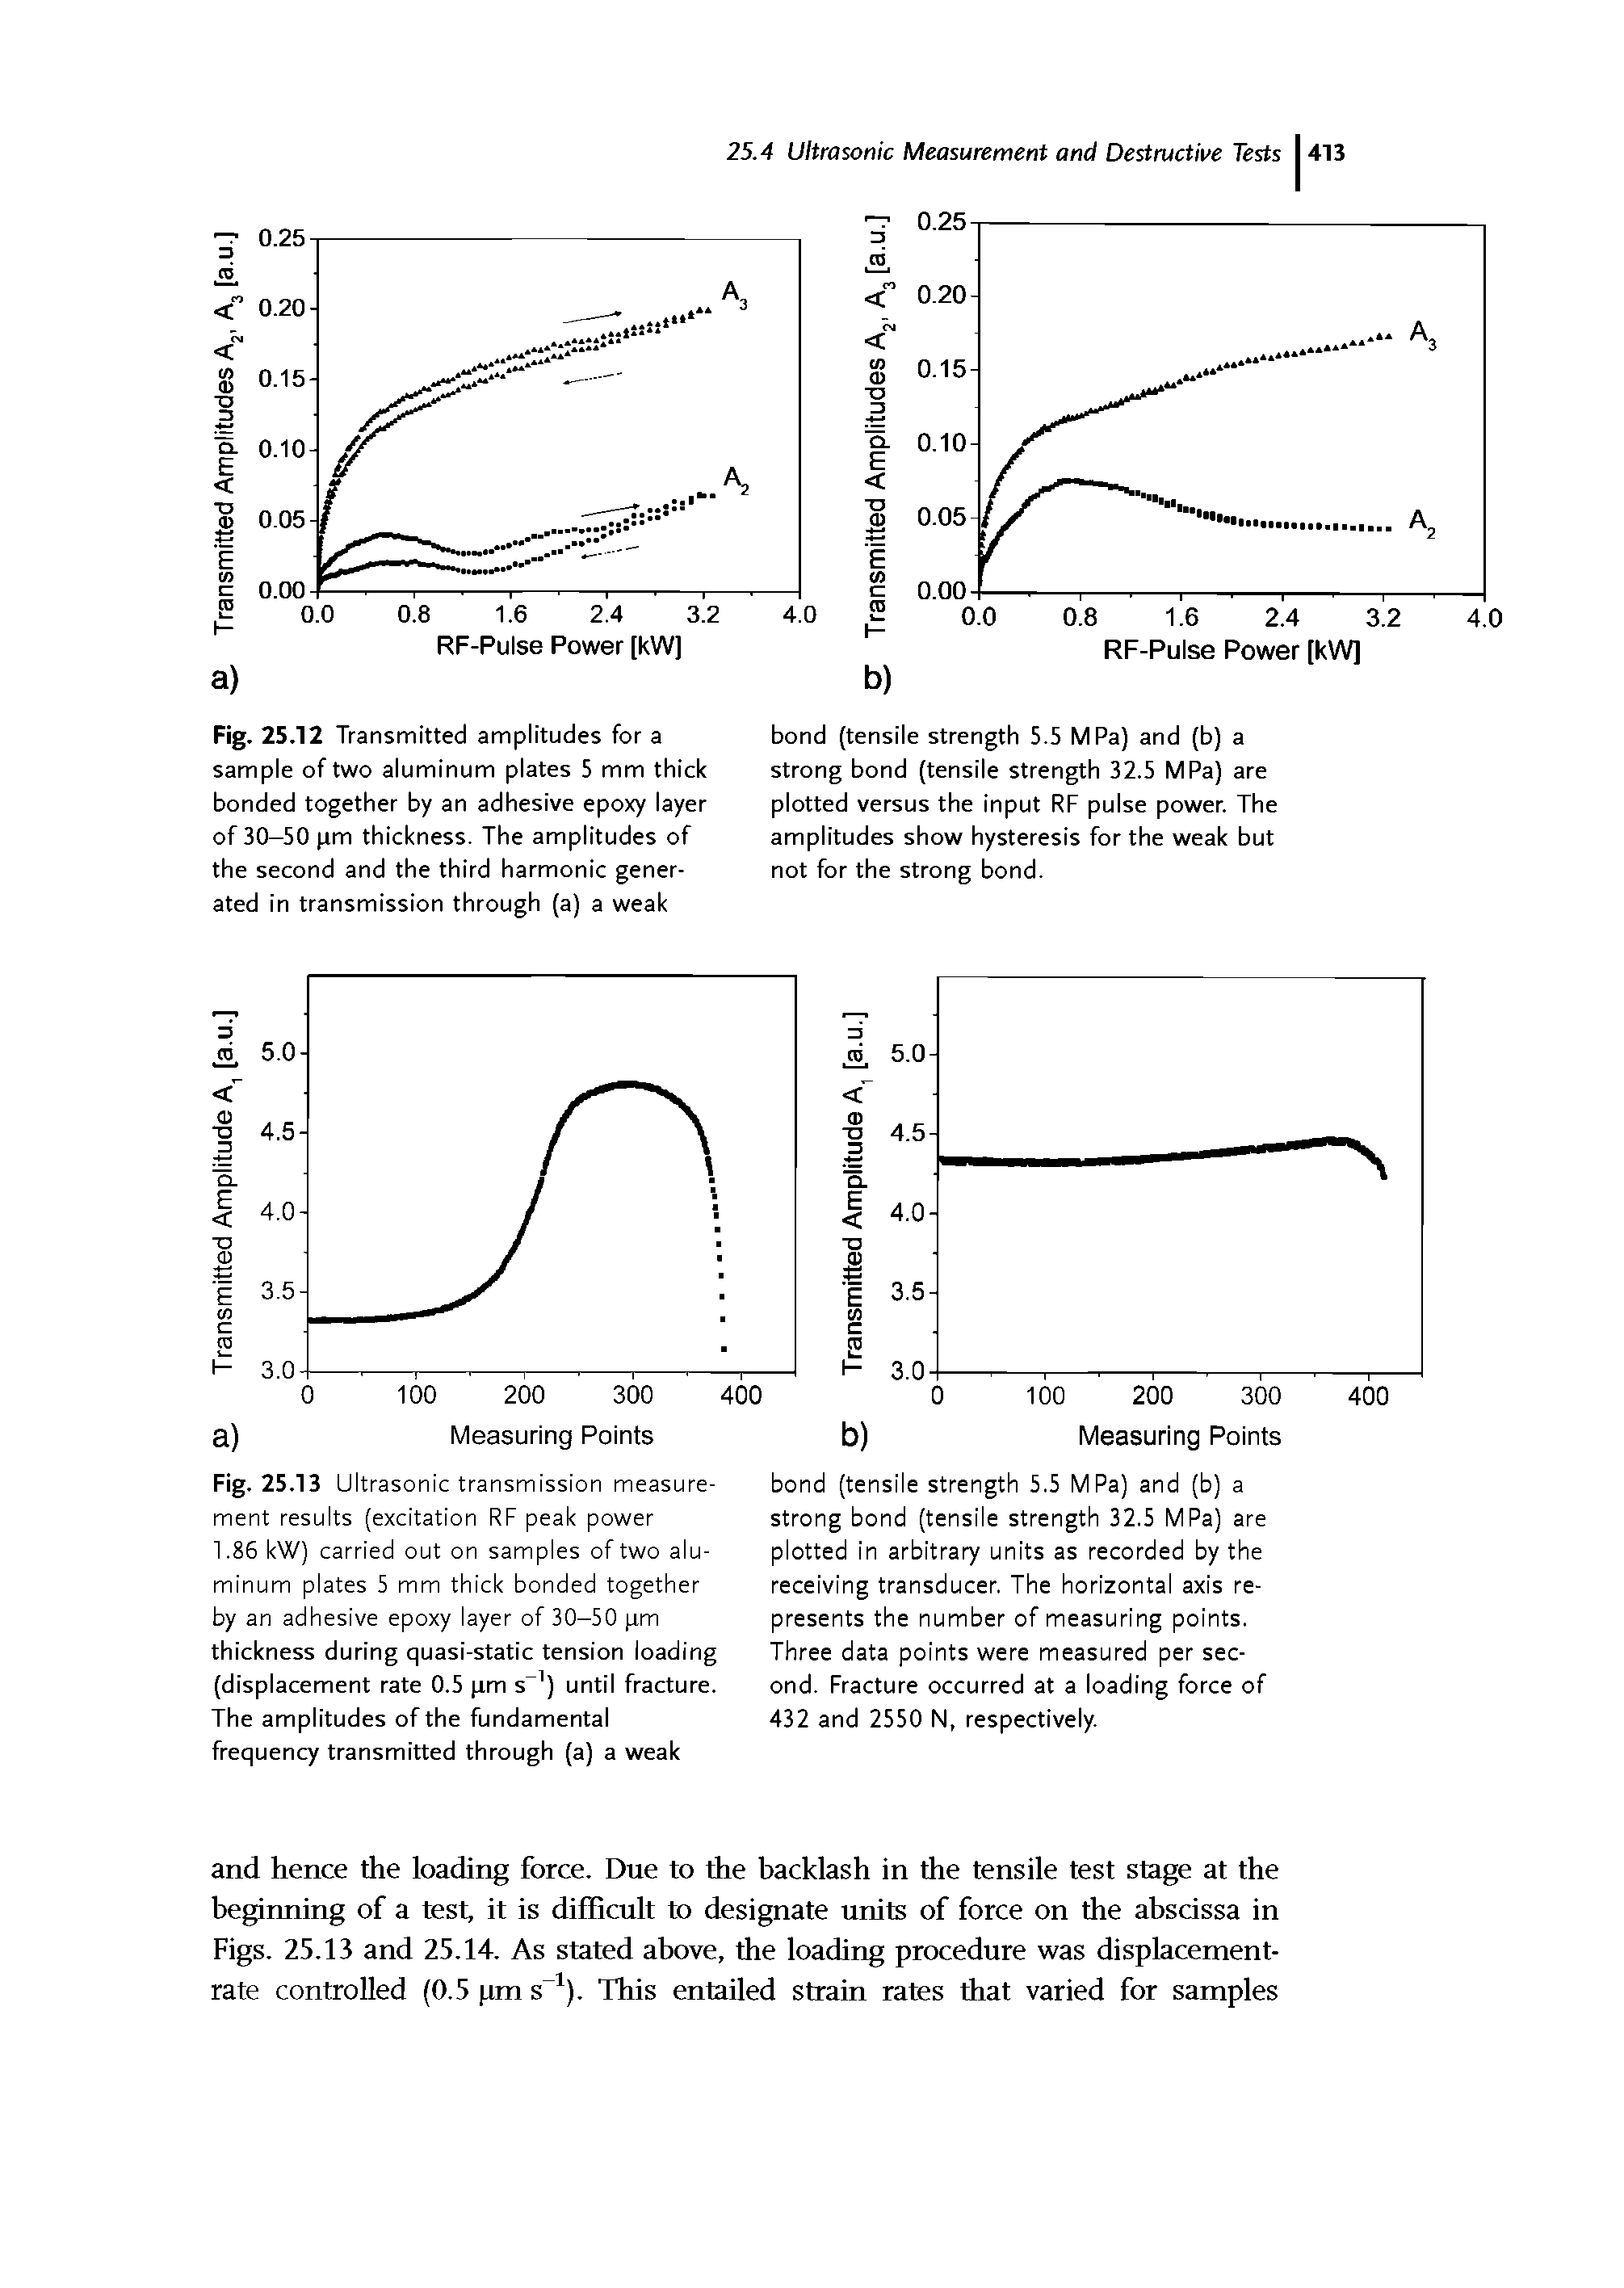 Fig. 25.13 Ultrasonic transmission measurement results (excitation RF peak power 1.85 kW) carried out on samples of two aluminum plates 5 mm thick bonded together by an adhesive epoxy layer of 30-50 pm thickness during quasi-static tension loading (displacement rate 0.5 pm s ) until fracture. The amplitudes of the fundamental frequency transmitted through (a) a weak...